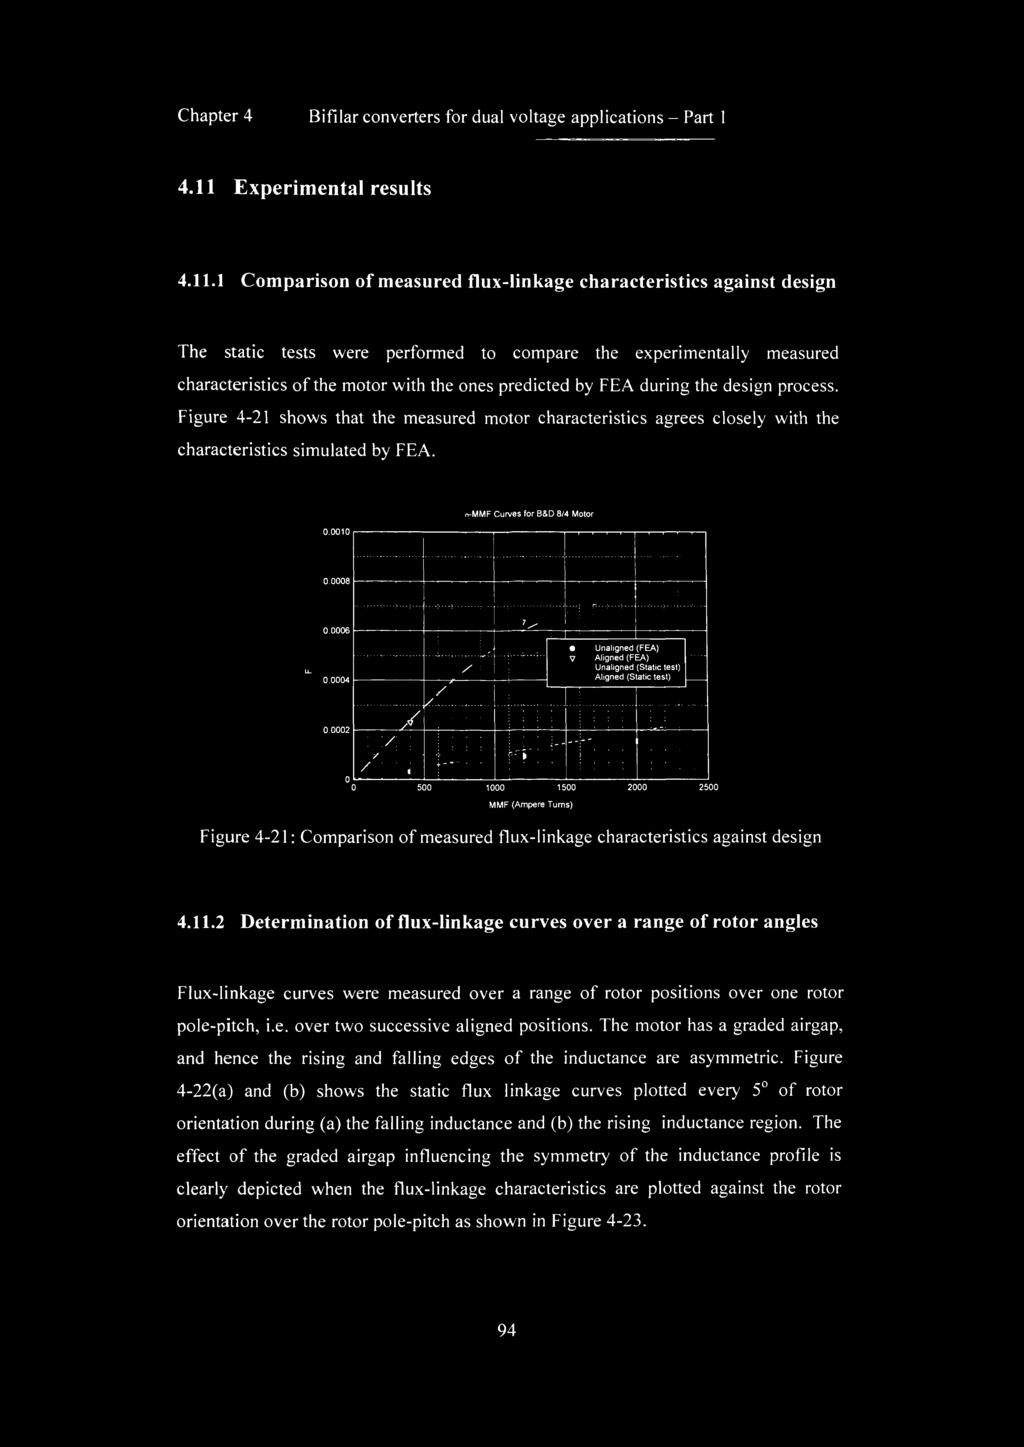 1 C om parison of m easured flux-linkage characteristics against design The static tests were performed to compare the experimentally measured characteristics o f the motor with the ones predicted by